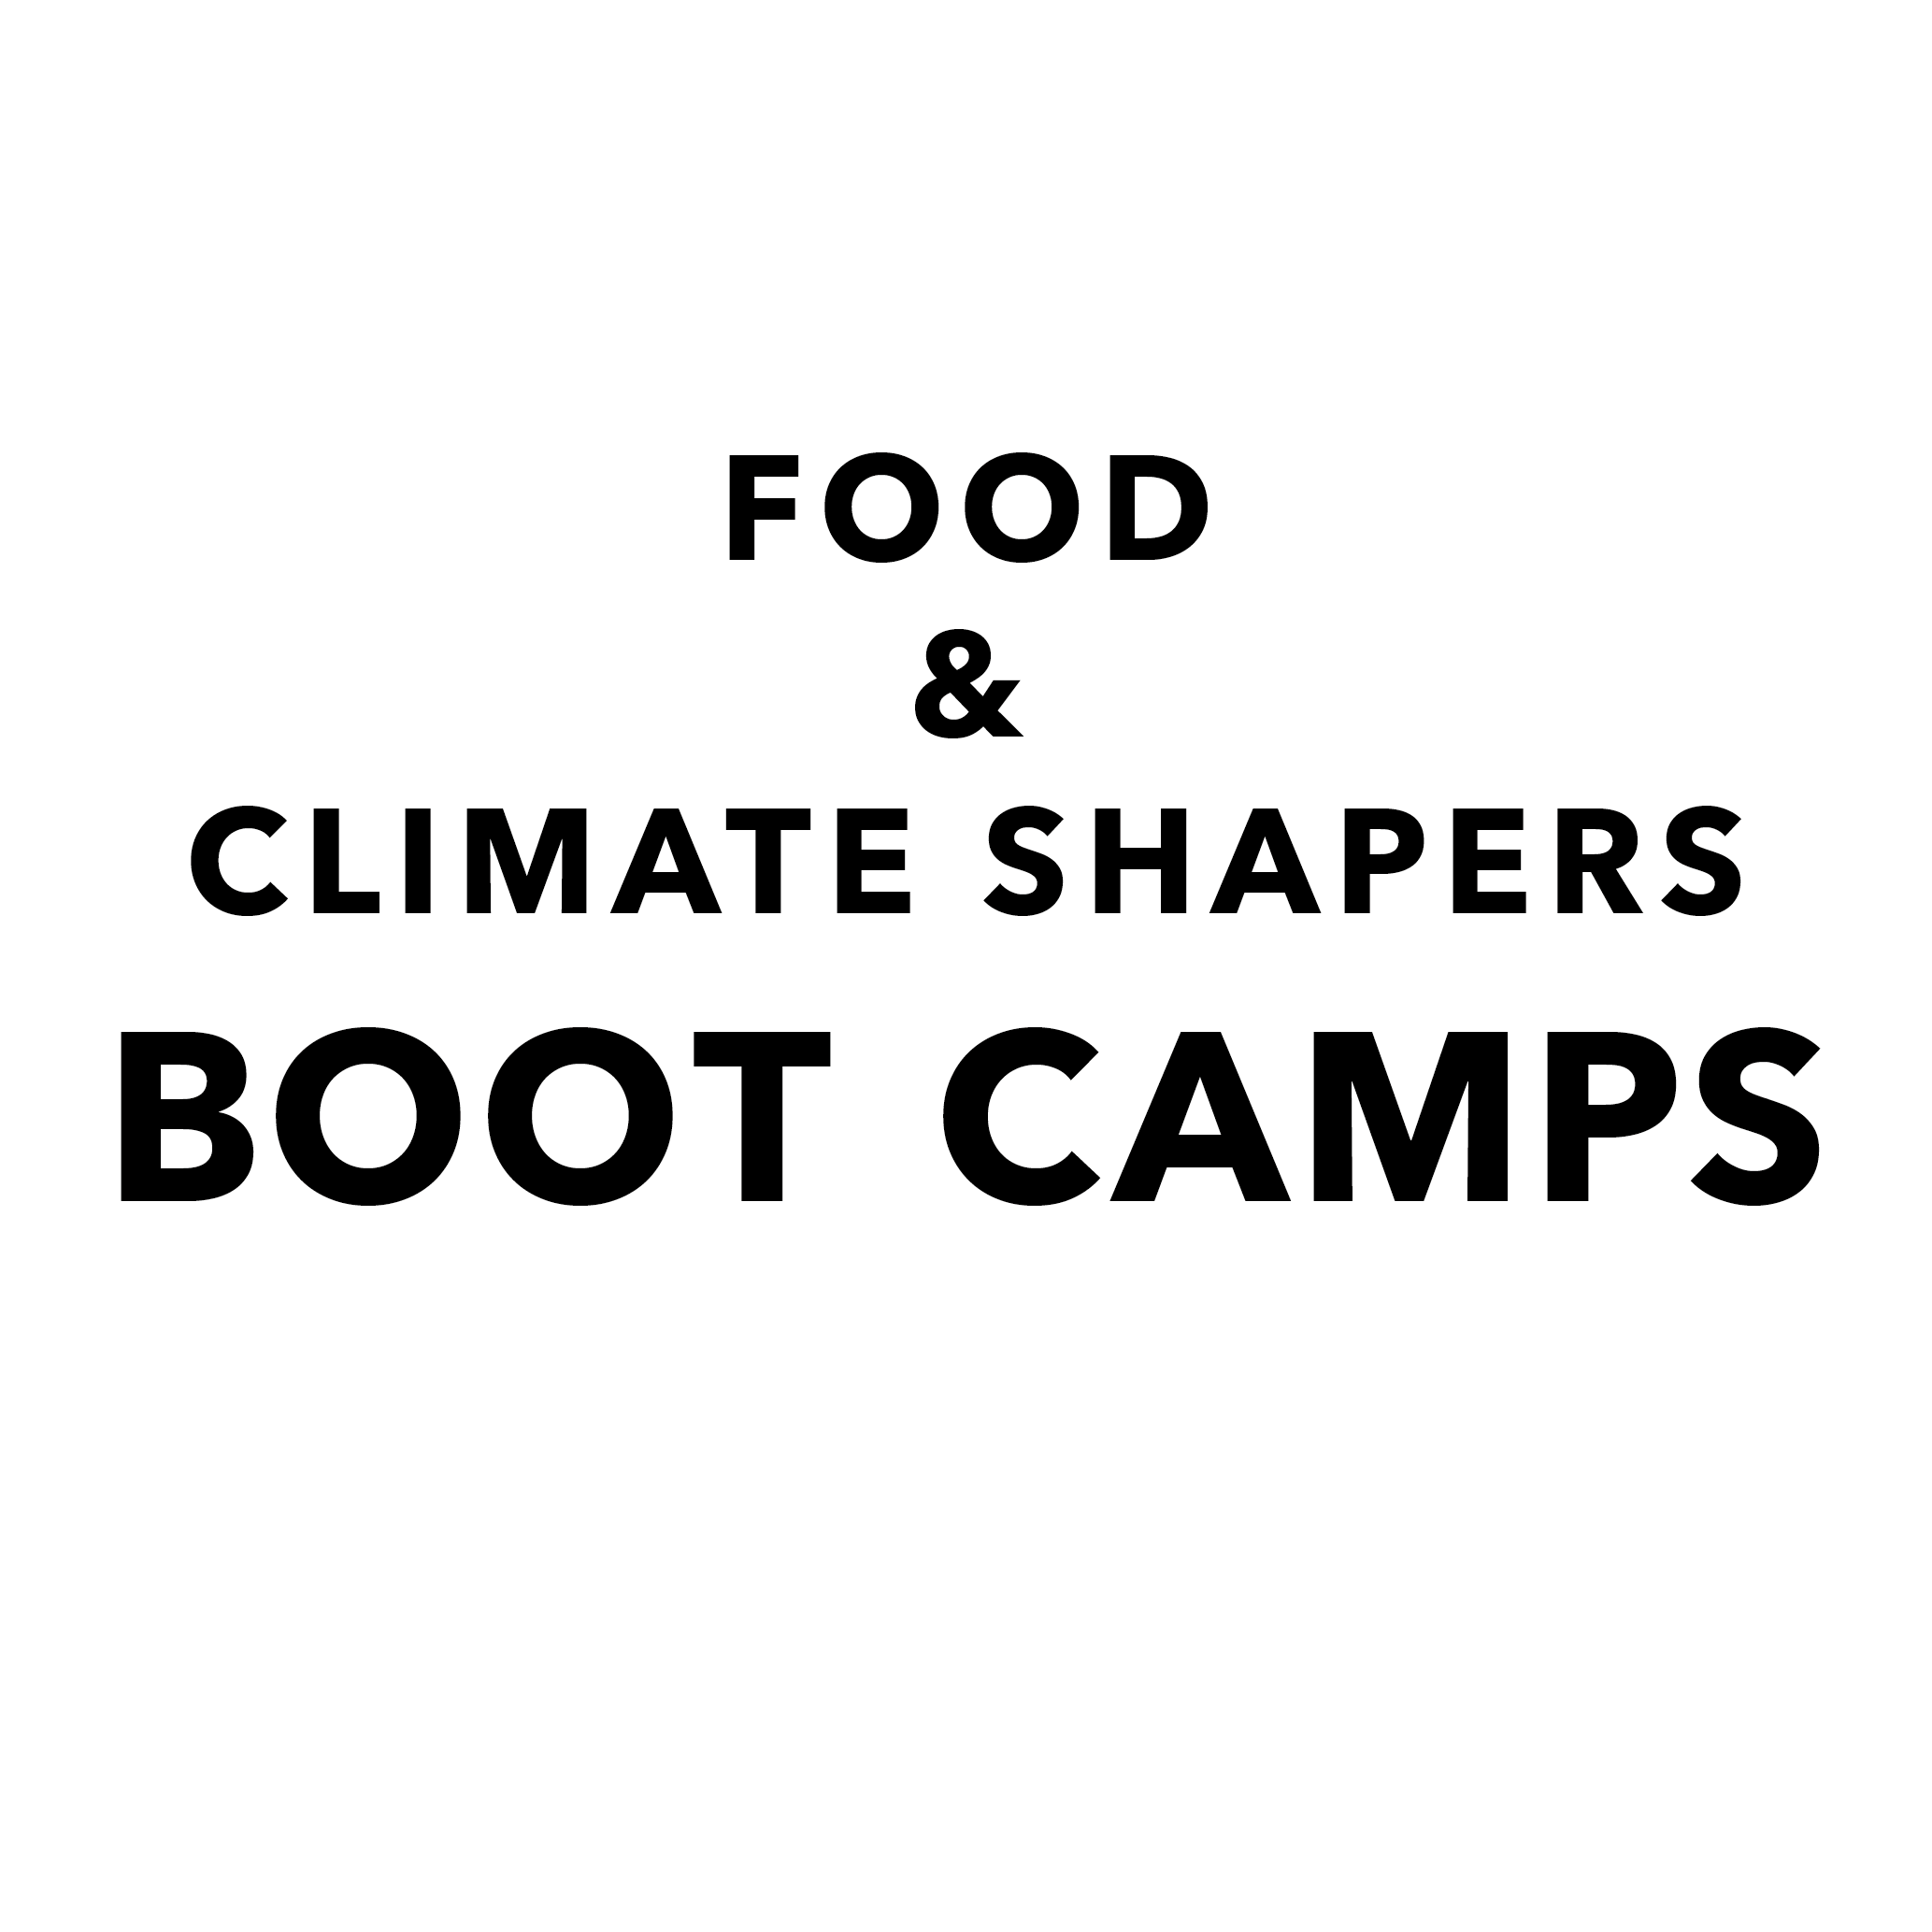 FOOD&CLIMATE SHAPERS BOOT CAMPS